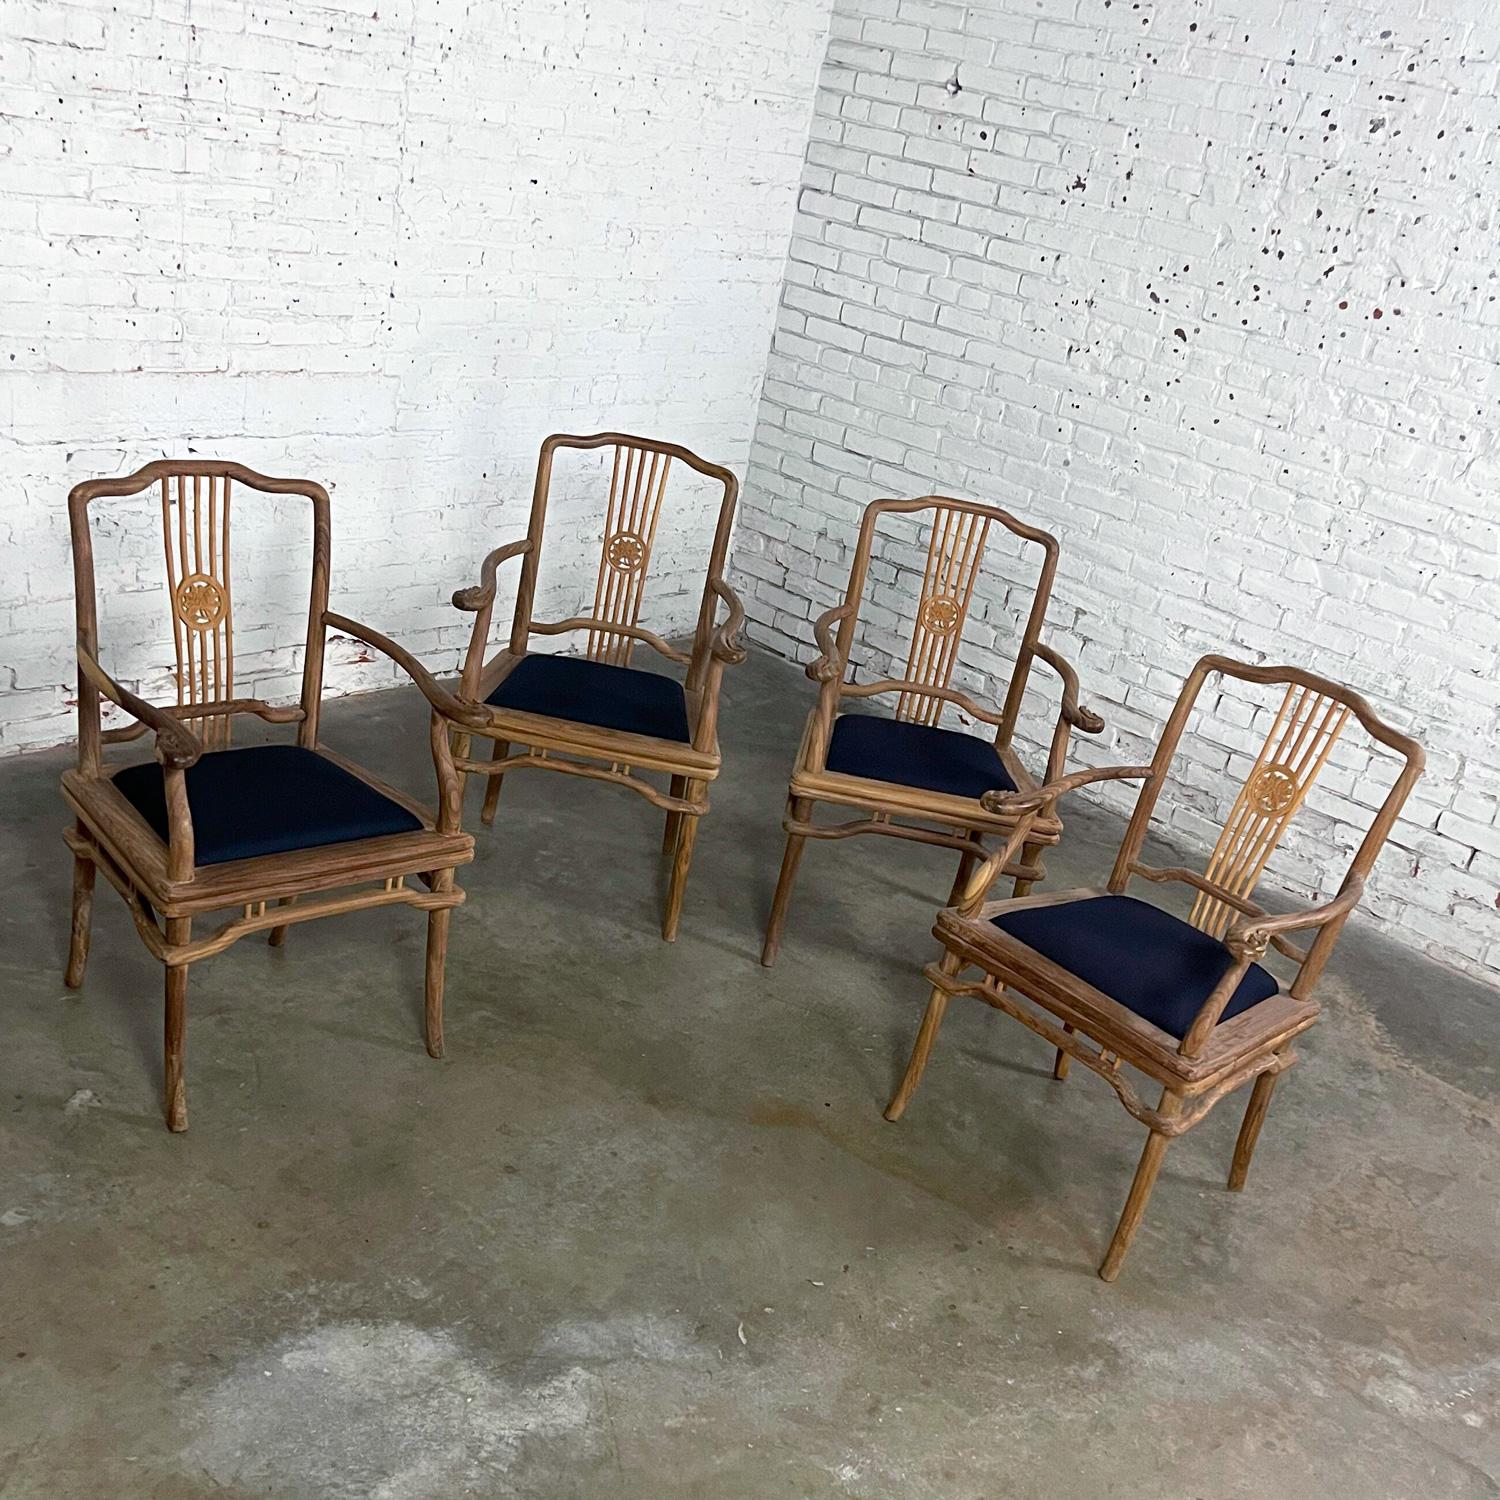 20th Century Late 20th Ming Style Indonesian Dining Armed Chairs Natural Teak w/ Black Seats For Sale